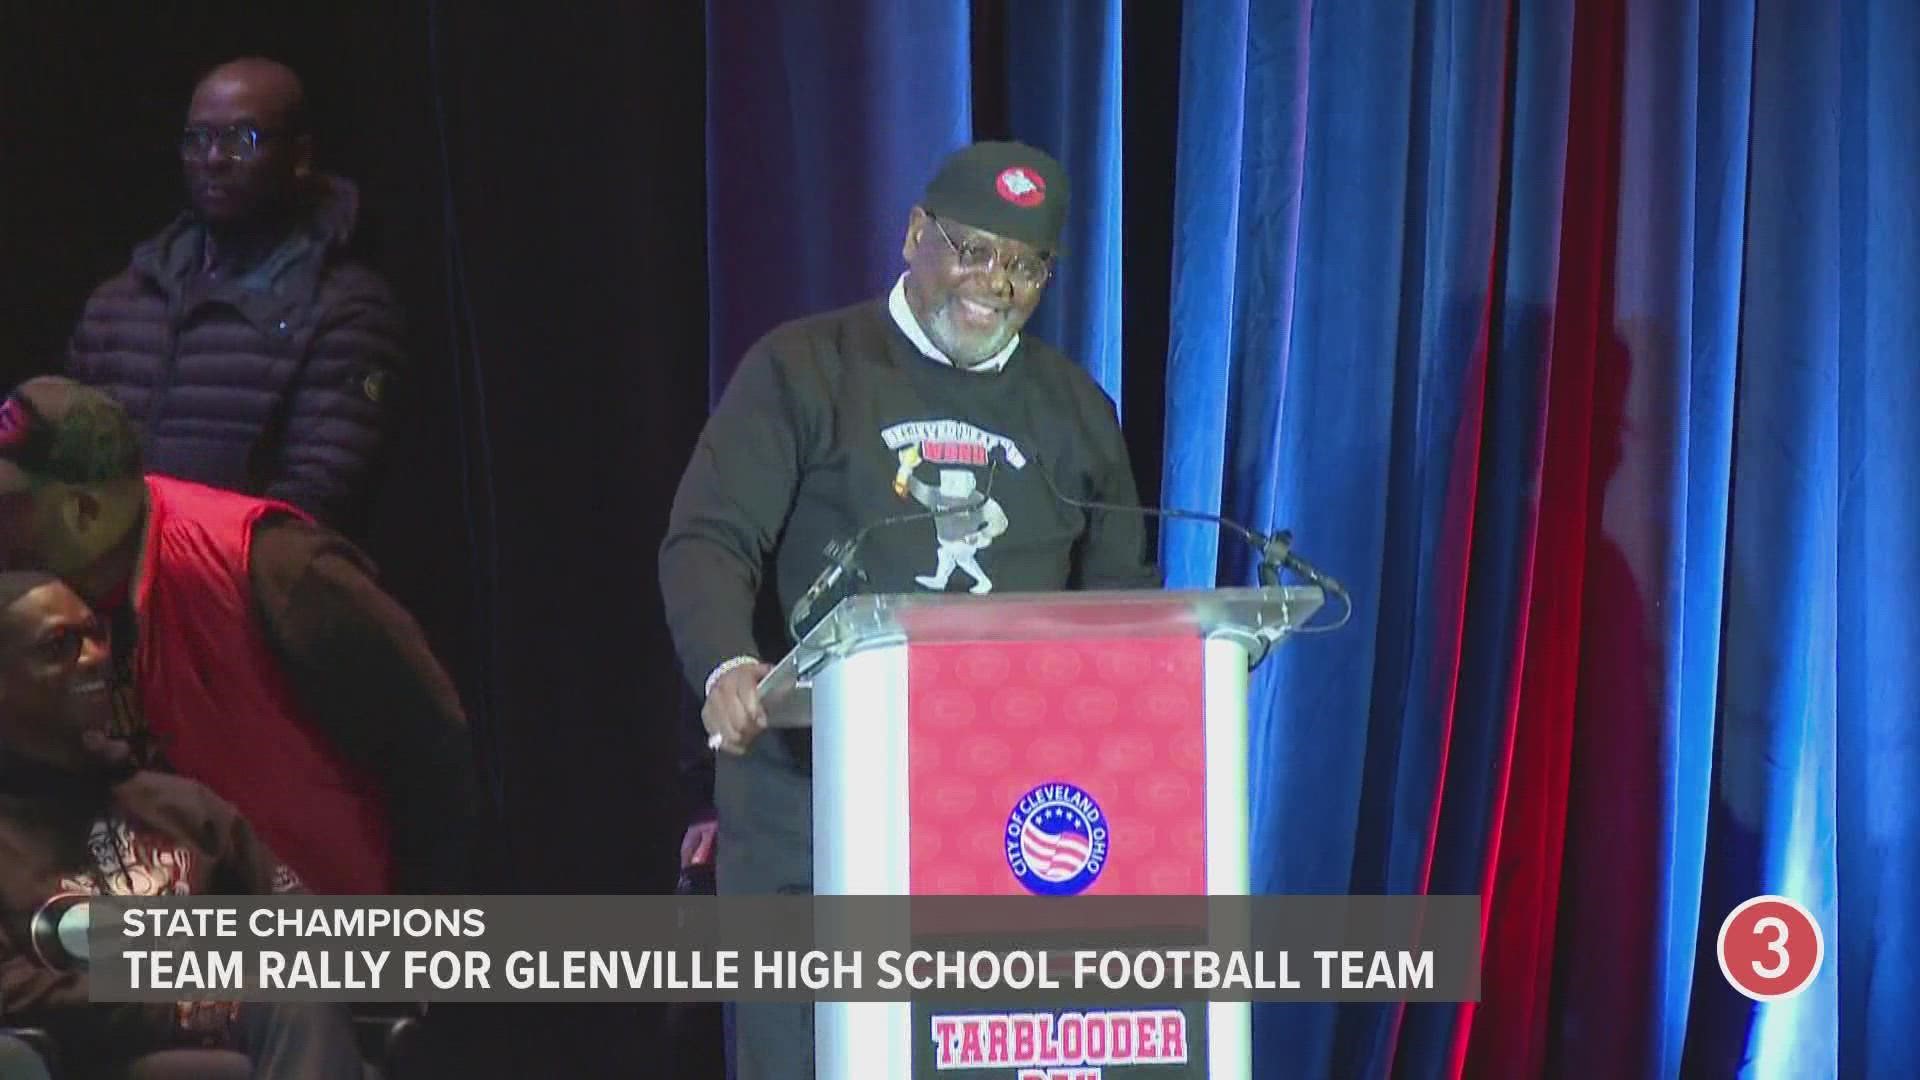 Here's what coach Ted Ginn Sr. had to say in his speech at the Glenville High School football team's championship victory rally.